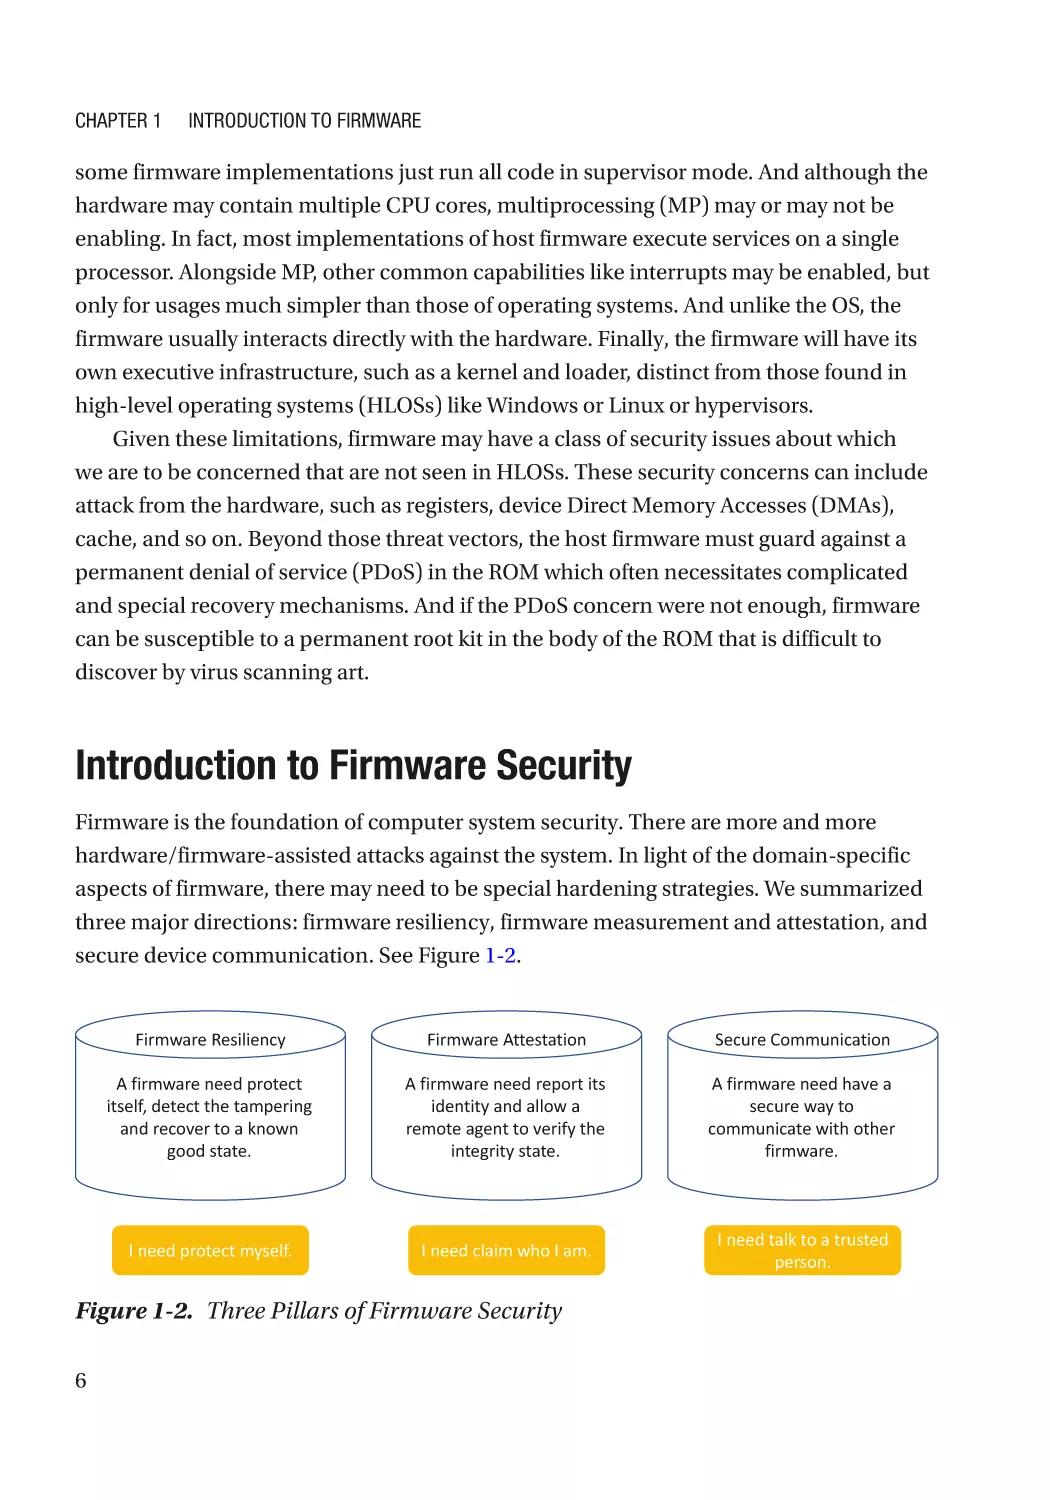 Introduction to Firmware Security